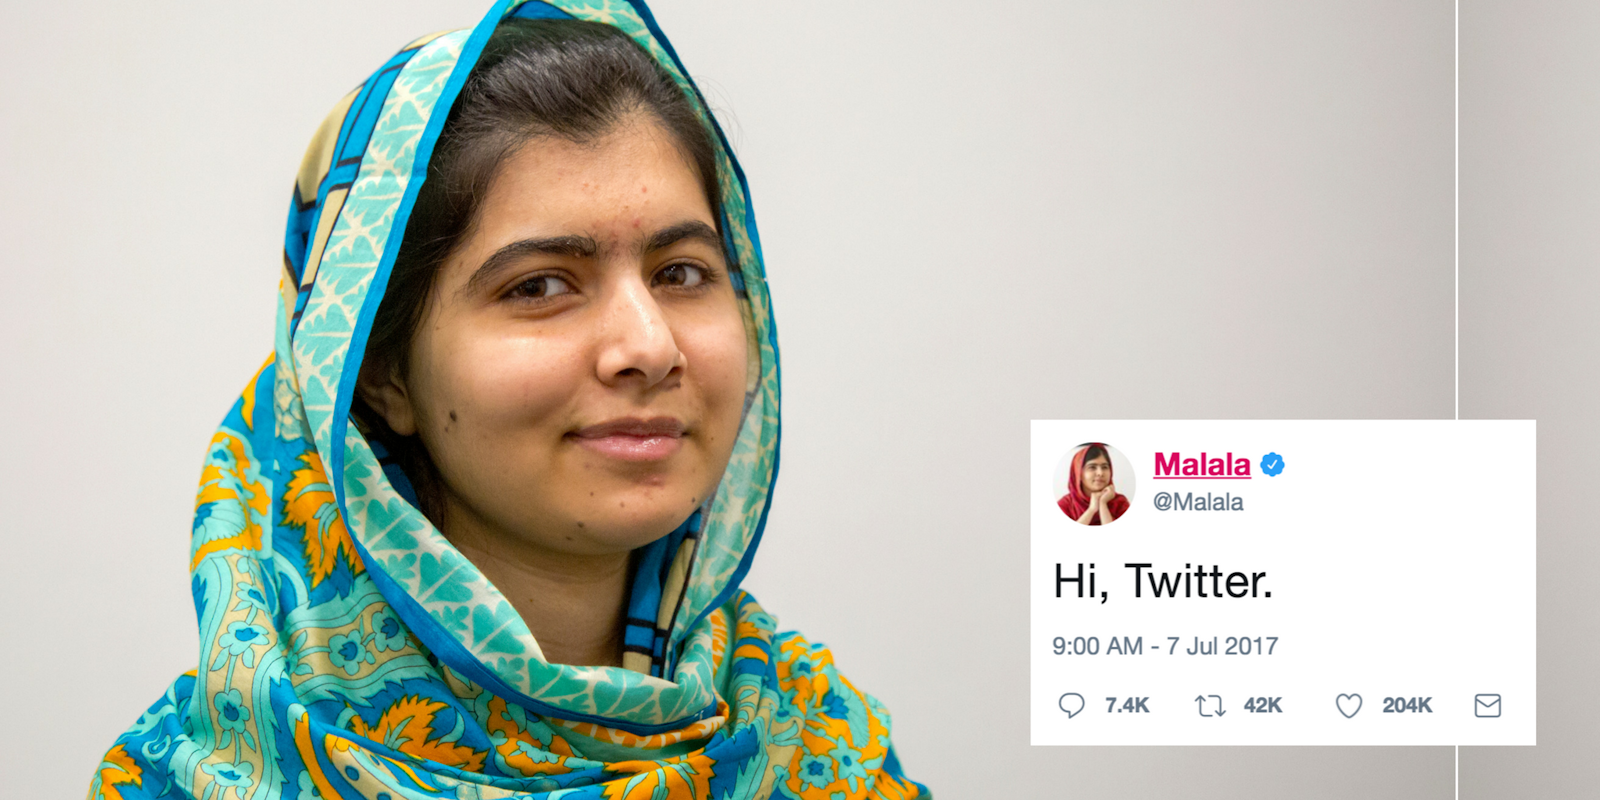 Malala Yousafzai and her first tweet on Twitter